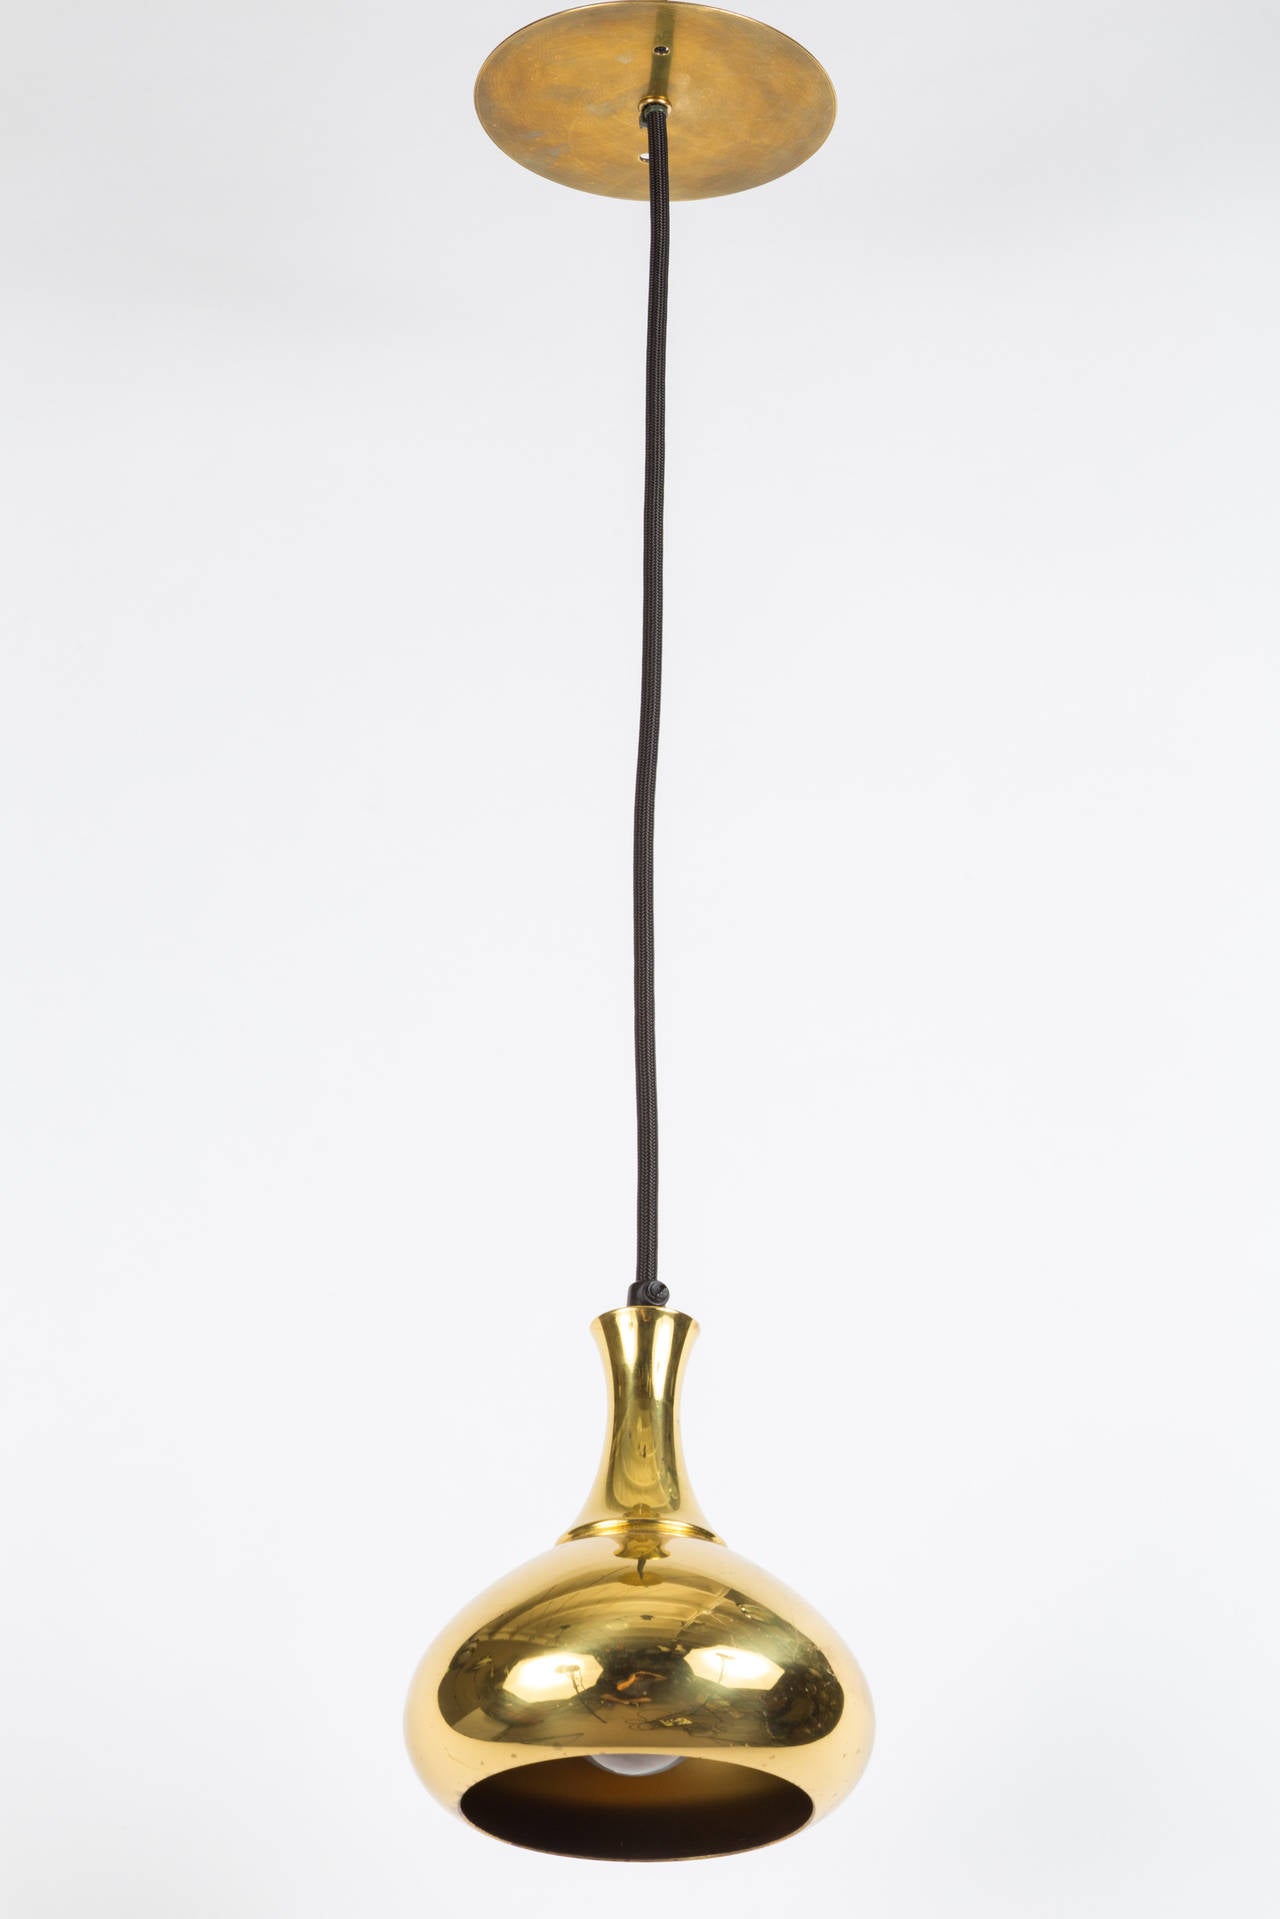 1950s Hans-Agne Jakobsson brass pendant for Markaryd, Sweden. Simple curves and pleasing brass patina. Height is readily adjustable to desired length.